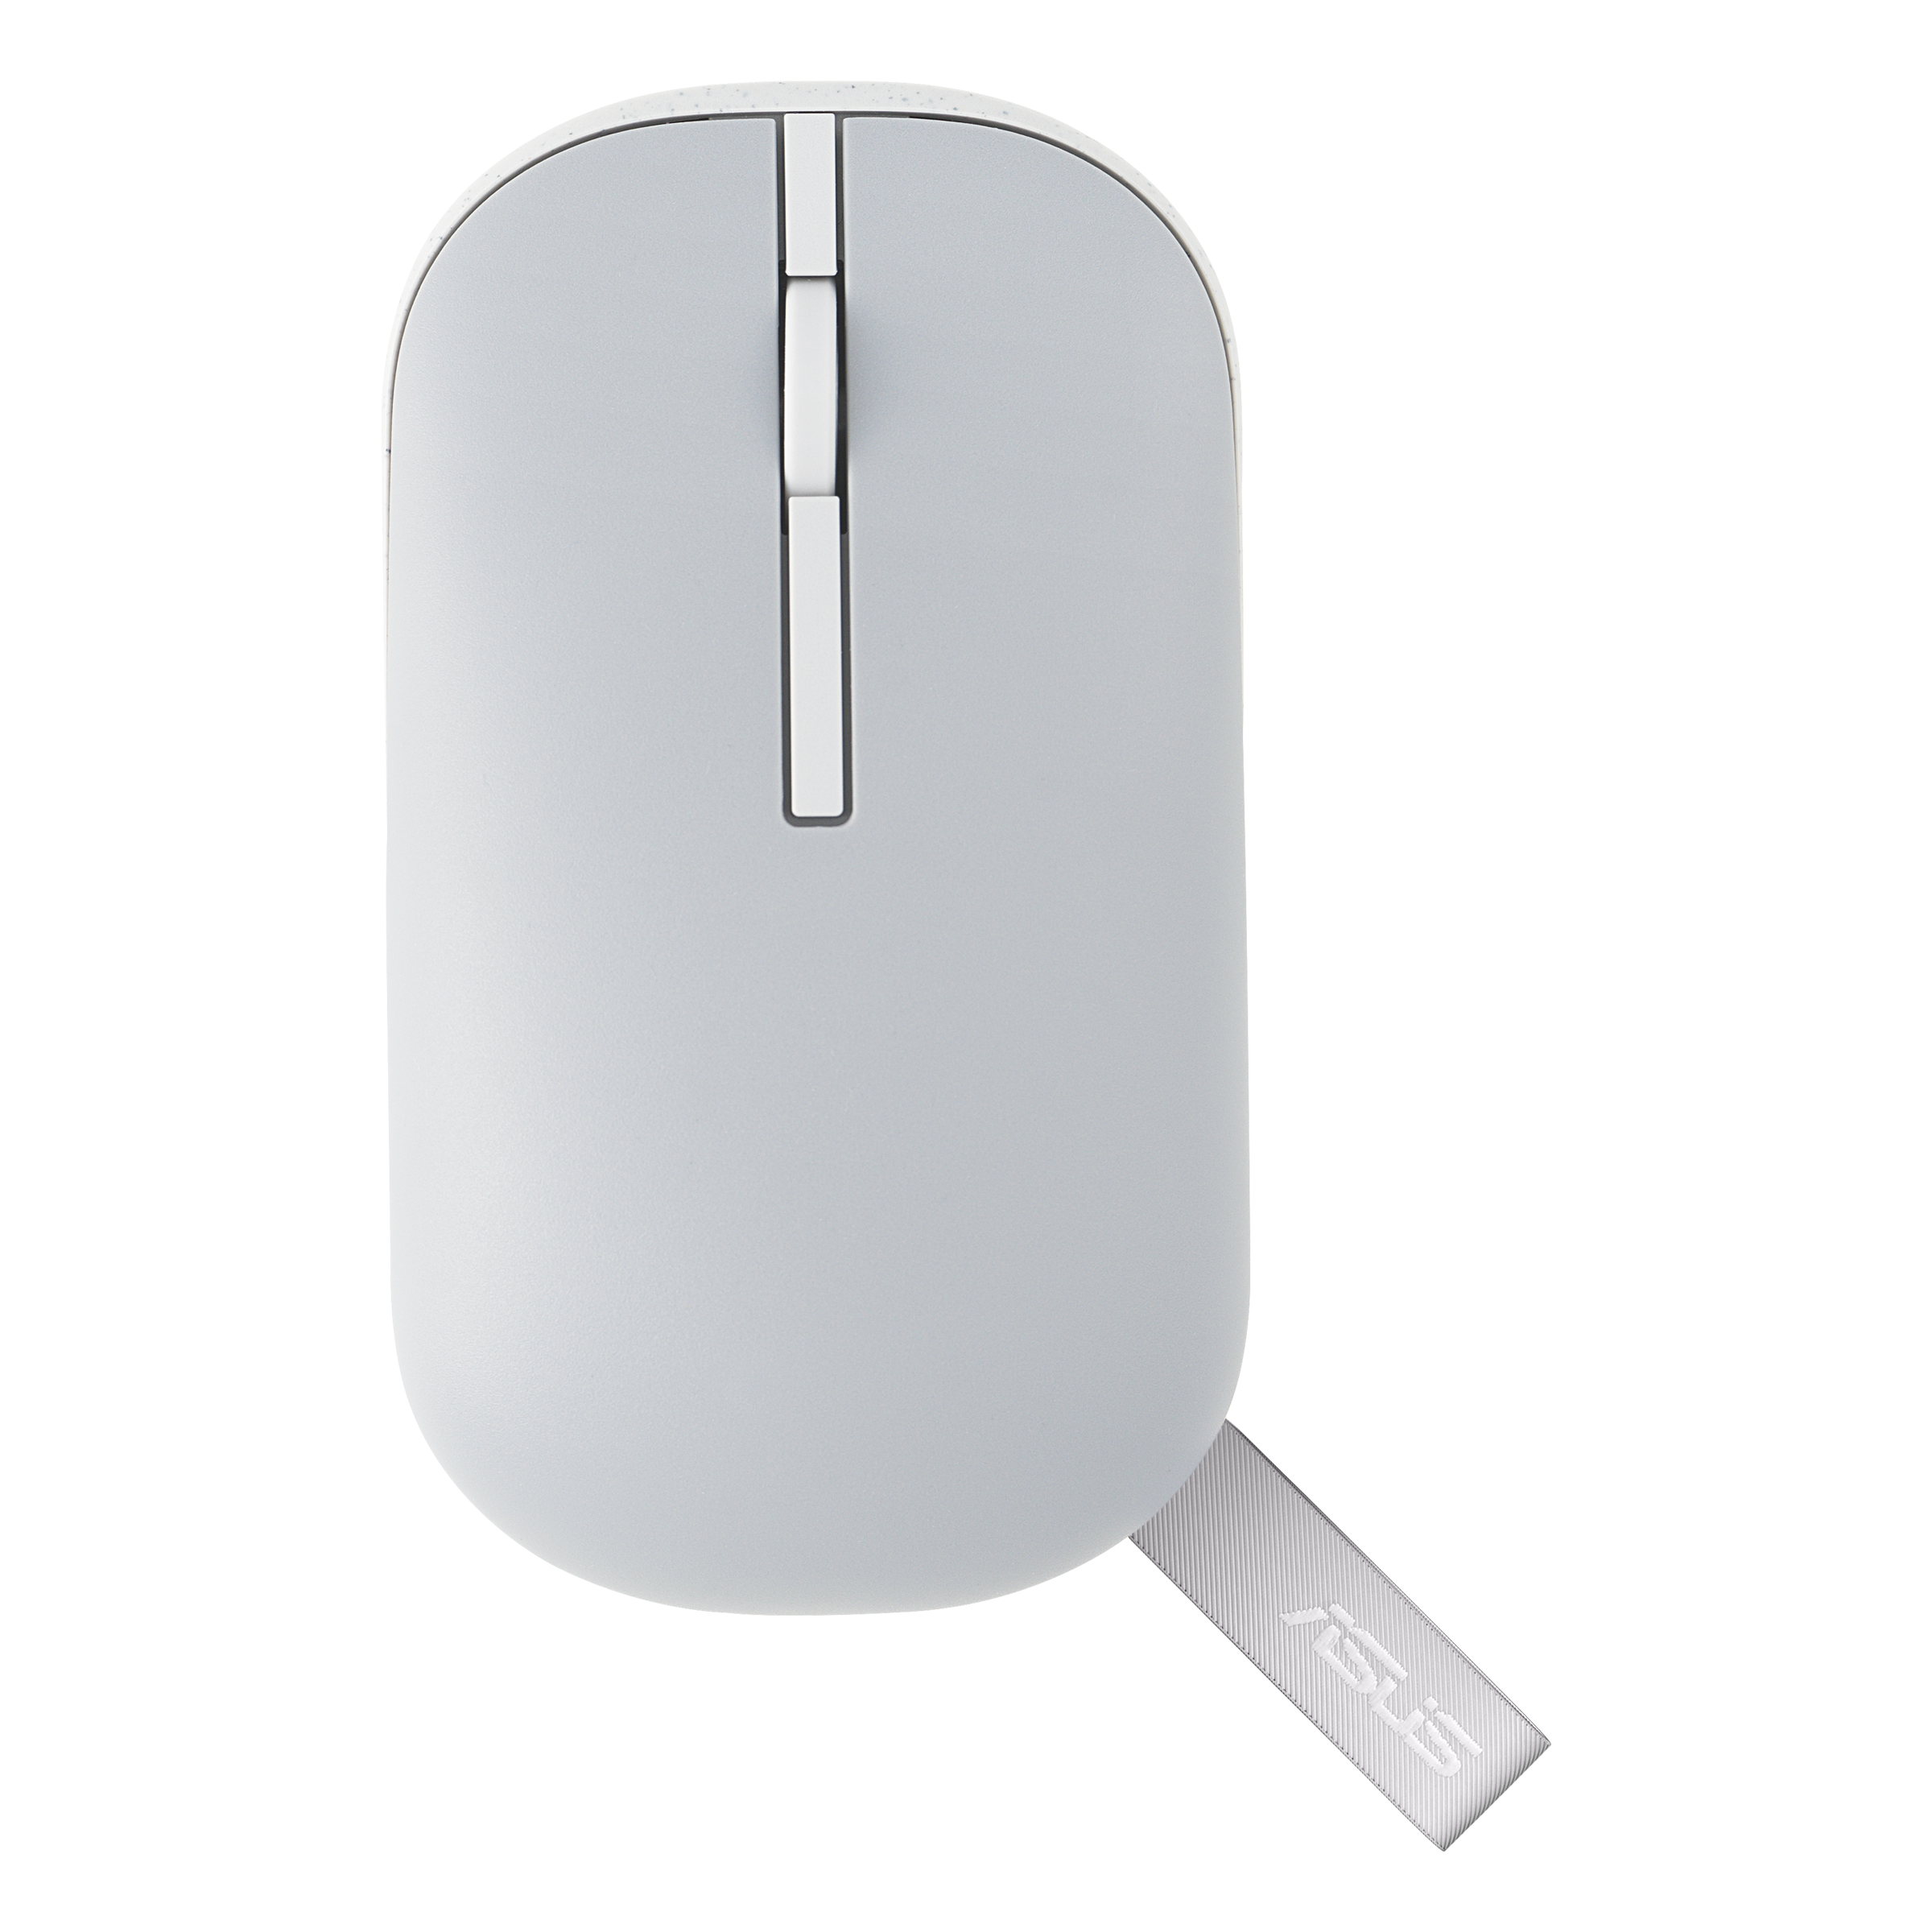 ASUS Marshmallow Mouse MD100 Lite